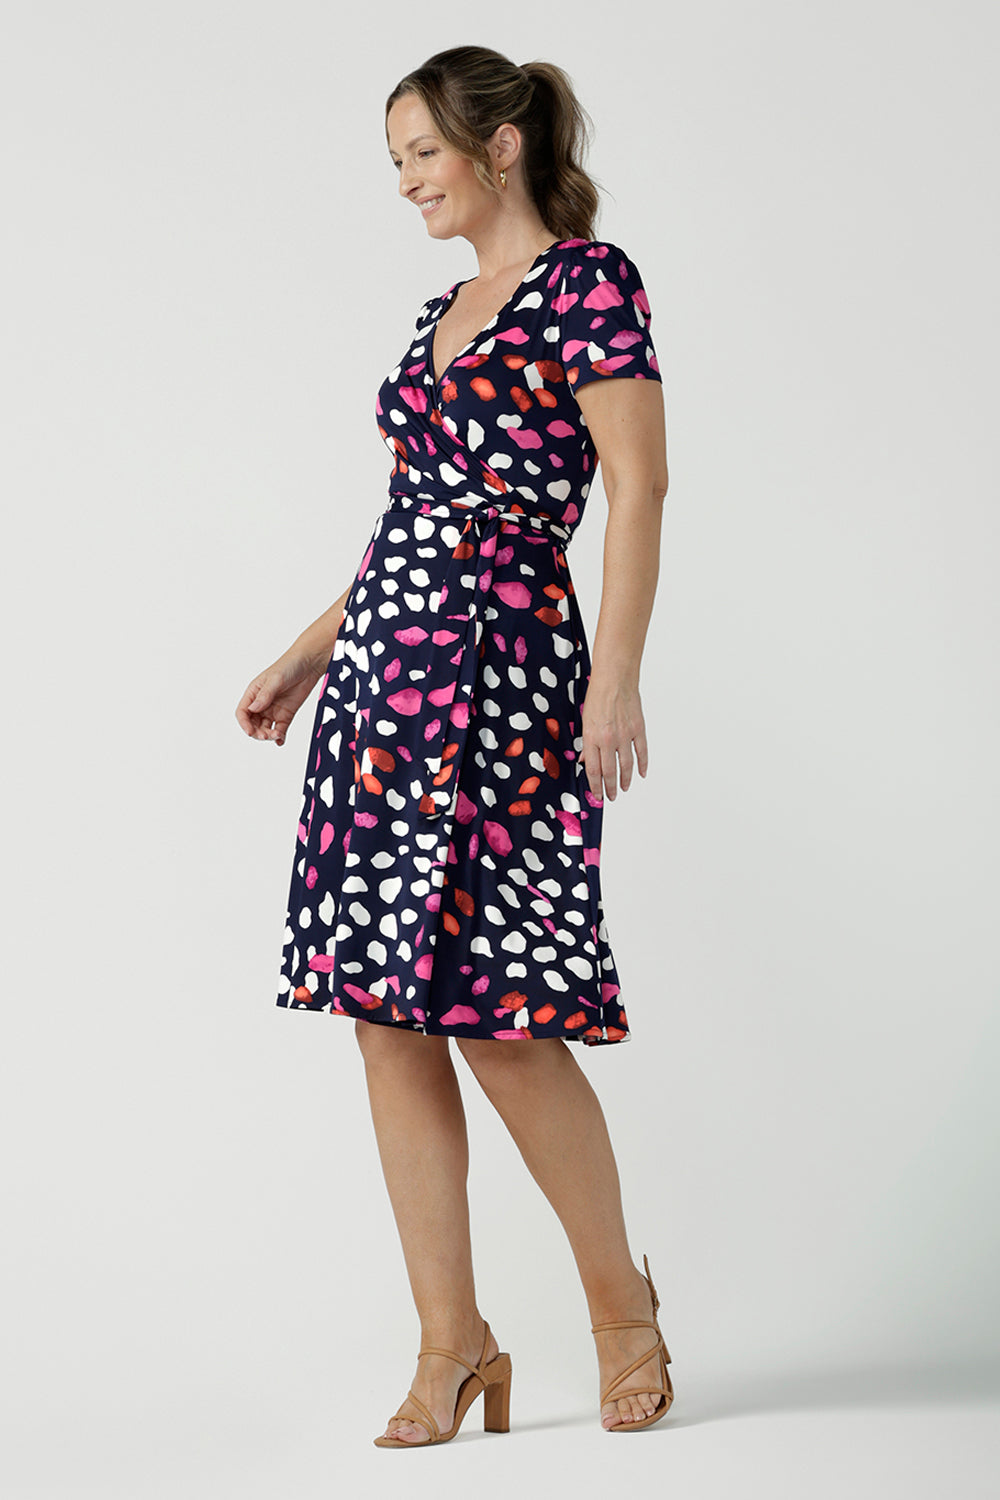  An over 40, size 10 woman wearing a abstract jersey print, knee length wrap dress with short sleeves. A great dress for summer casual wear, or for travel. Shop made in Australia dresses in petite to plus sizes online at Australian fashion brand, Leina & Fleur.